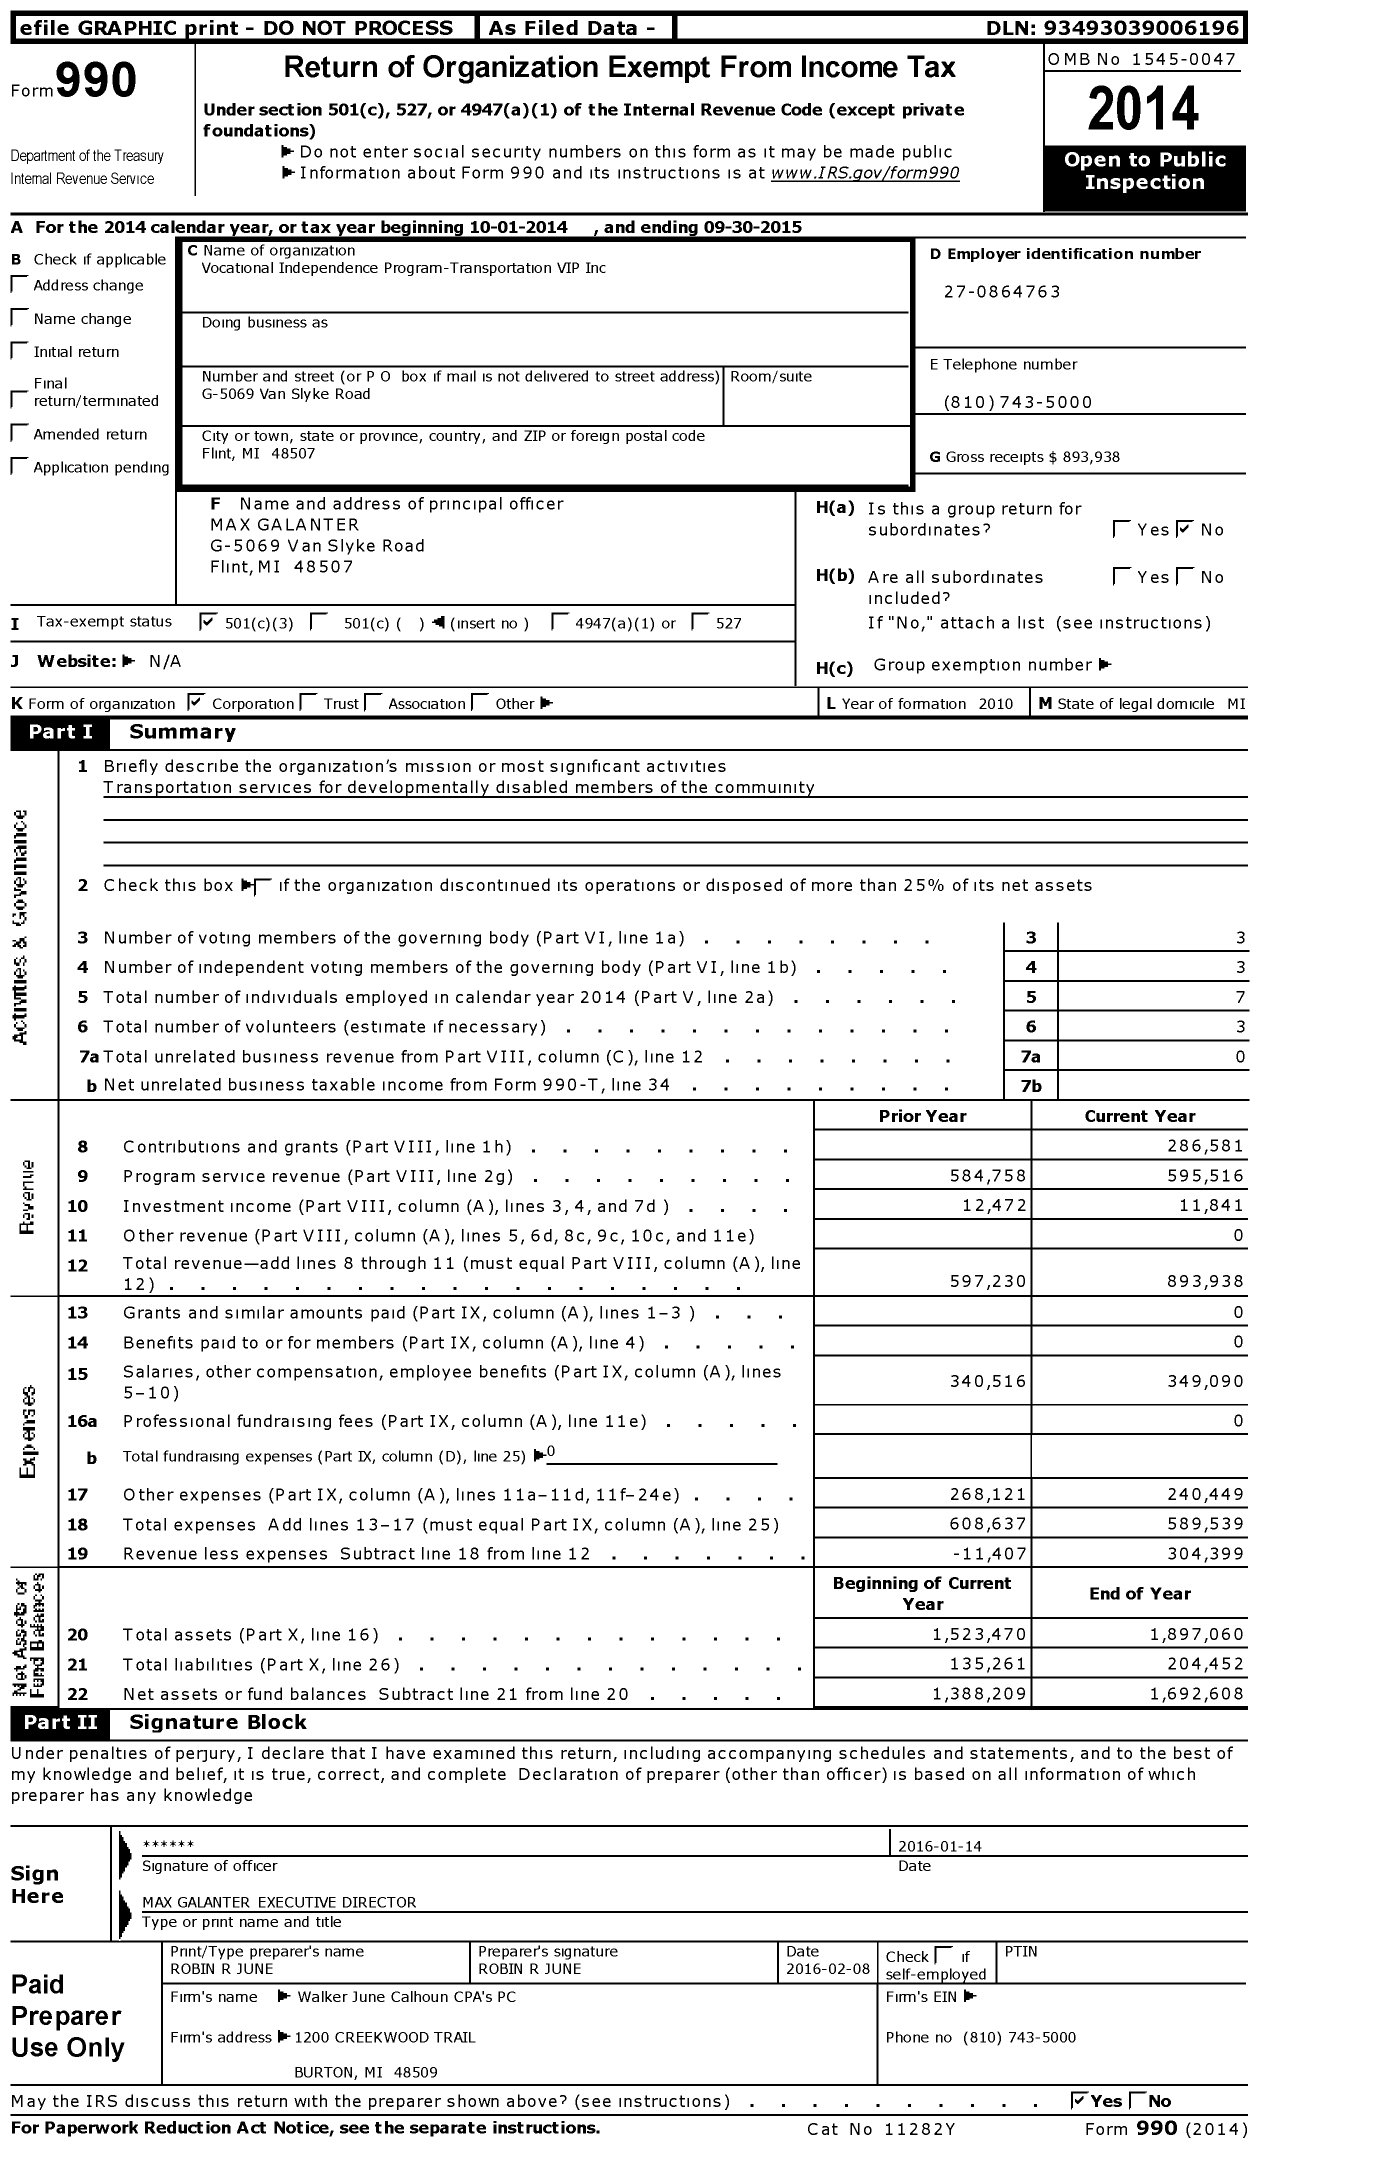 Image of first page of 2014 Form 990 for Vocational Independence Program Transportation VIP